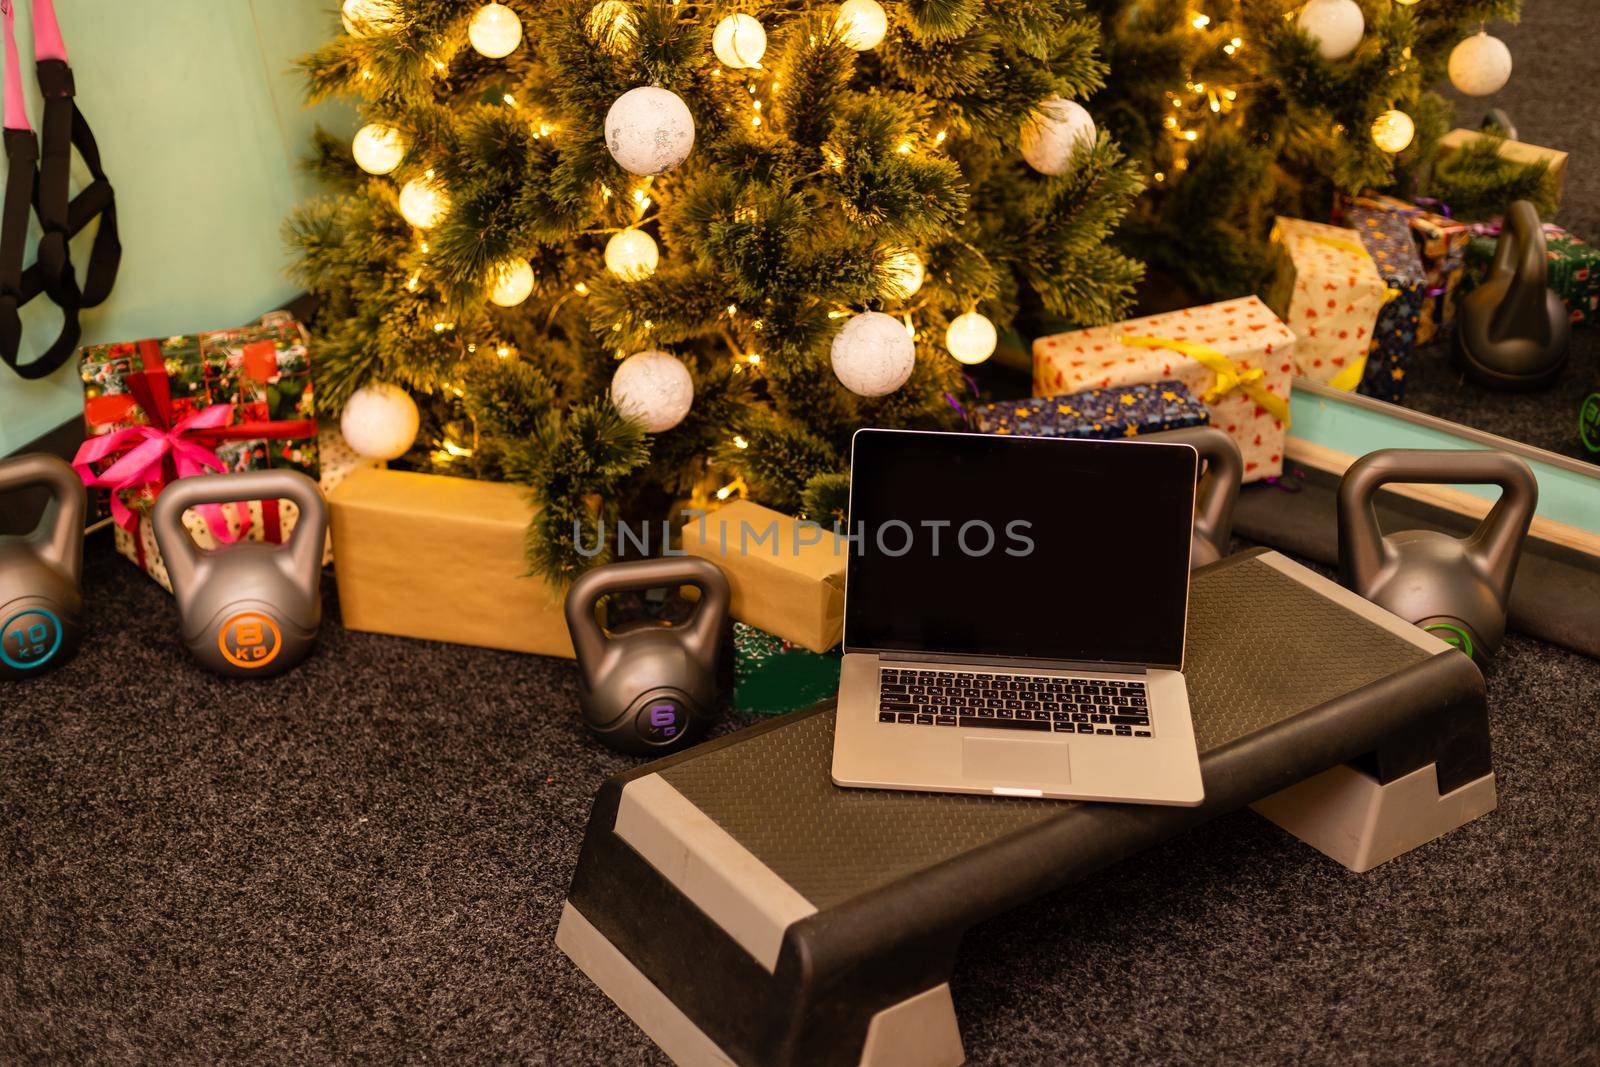 Sport accessories. Dumbbells, computer tablet, fir tree branches and Christmas decorations on background. Top view with copy space. Fitness, sport and healthy lifestyle.